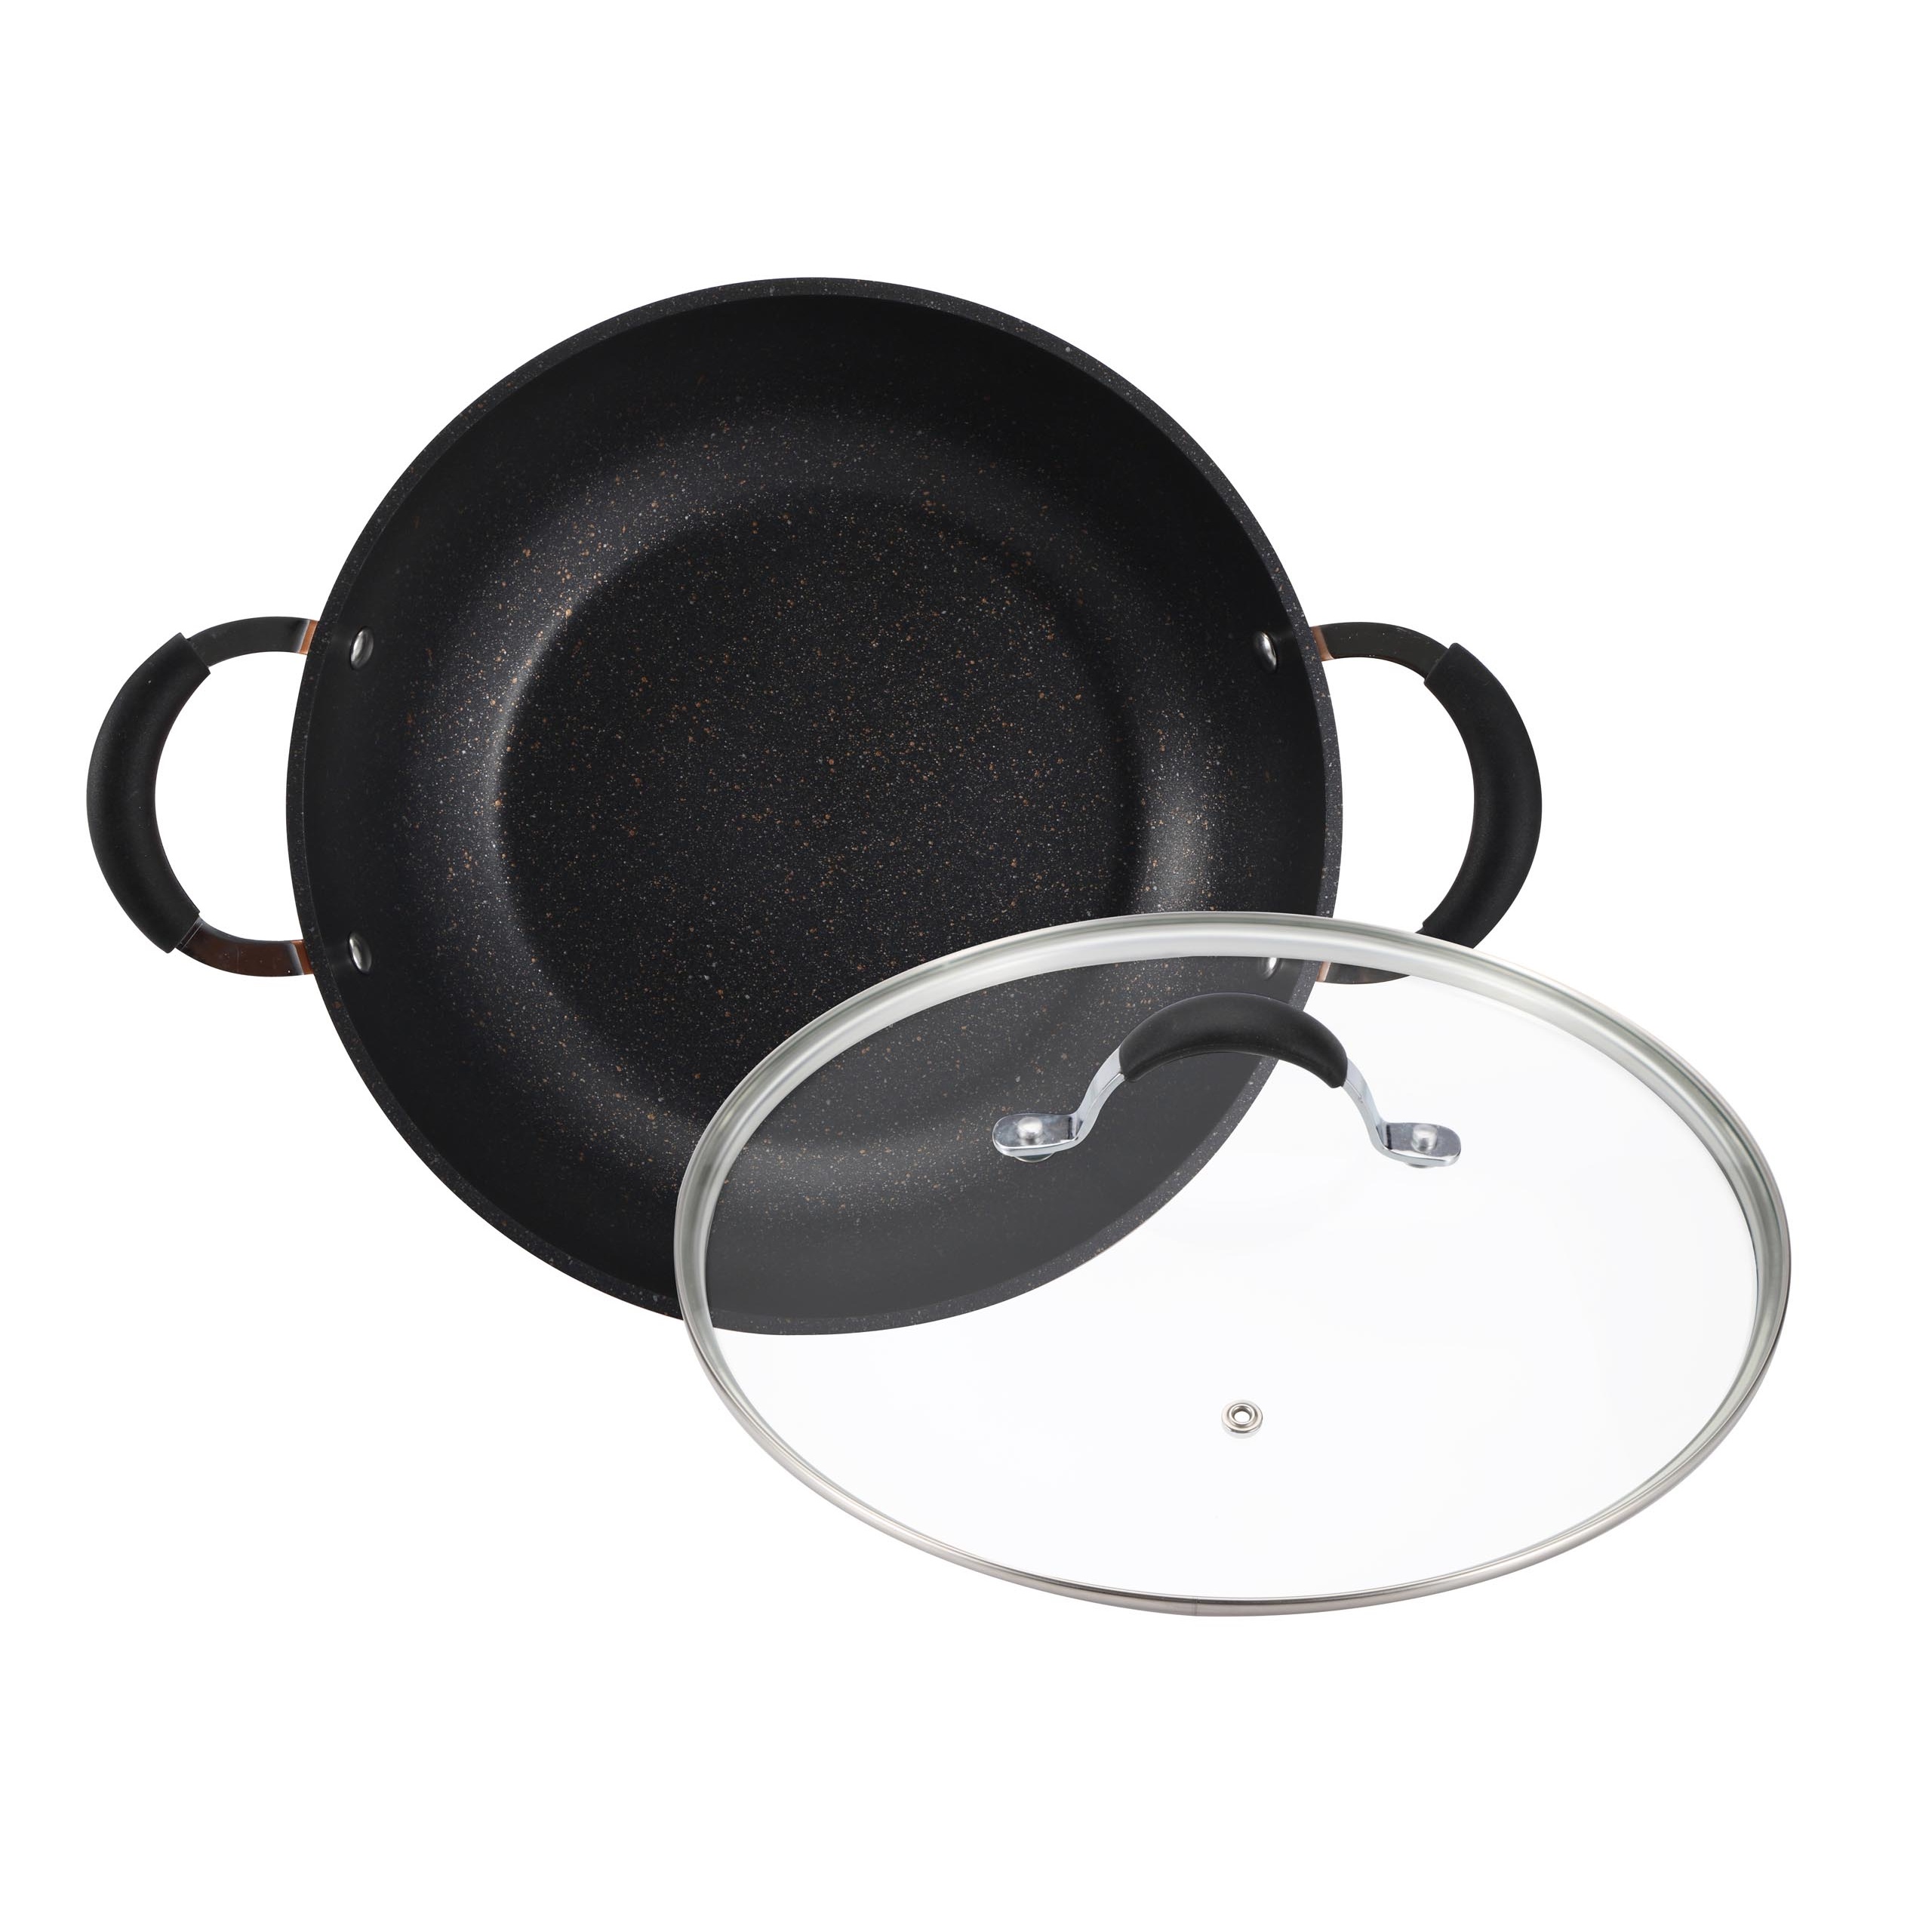 Bergner Non-Stick Kadhai with Glass Lid, Copper - 3.3 Ltr